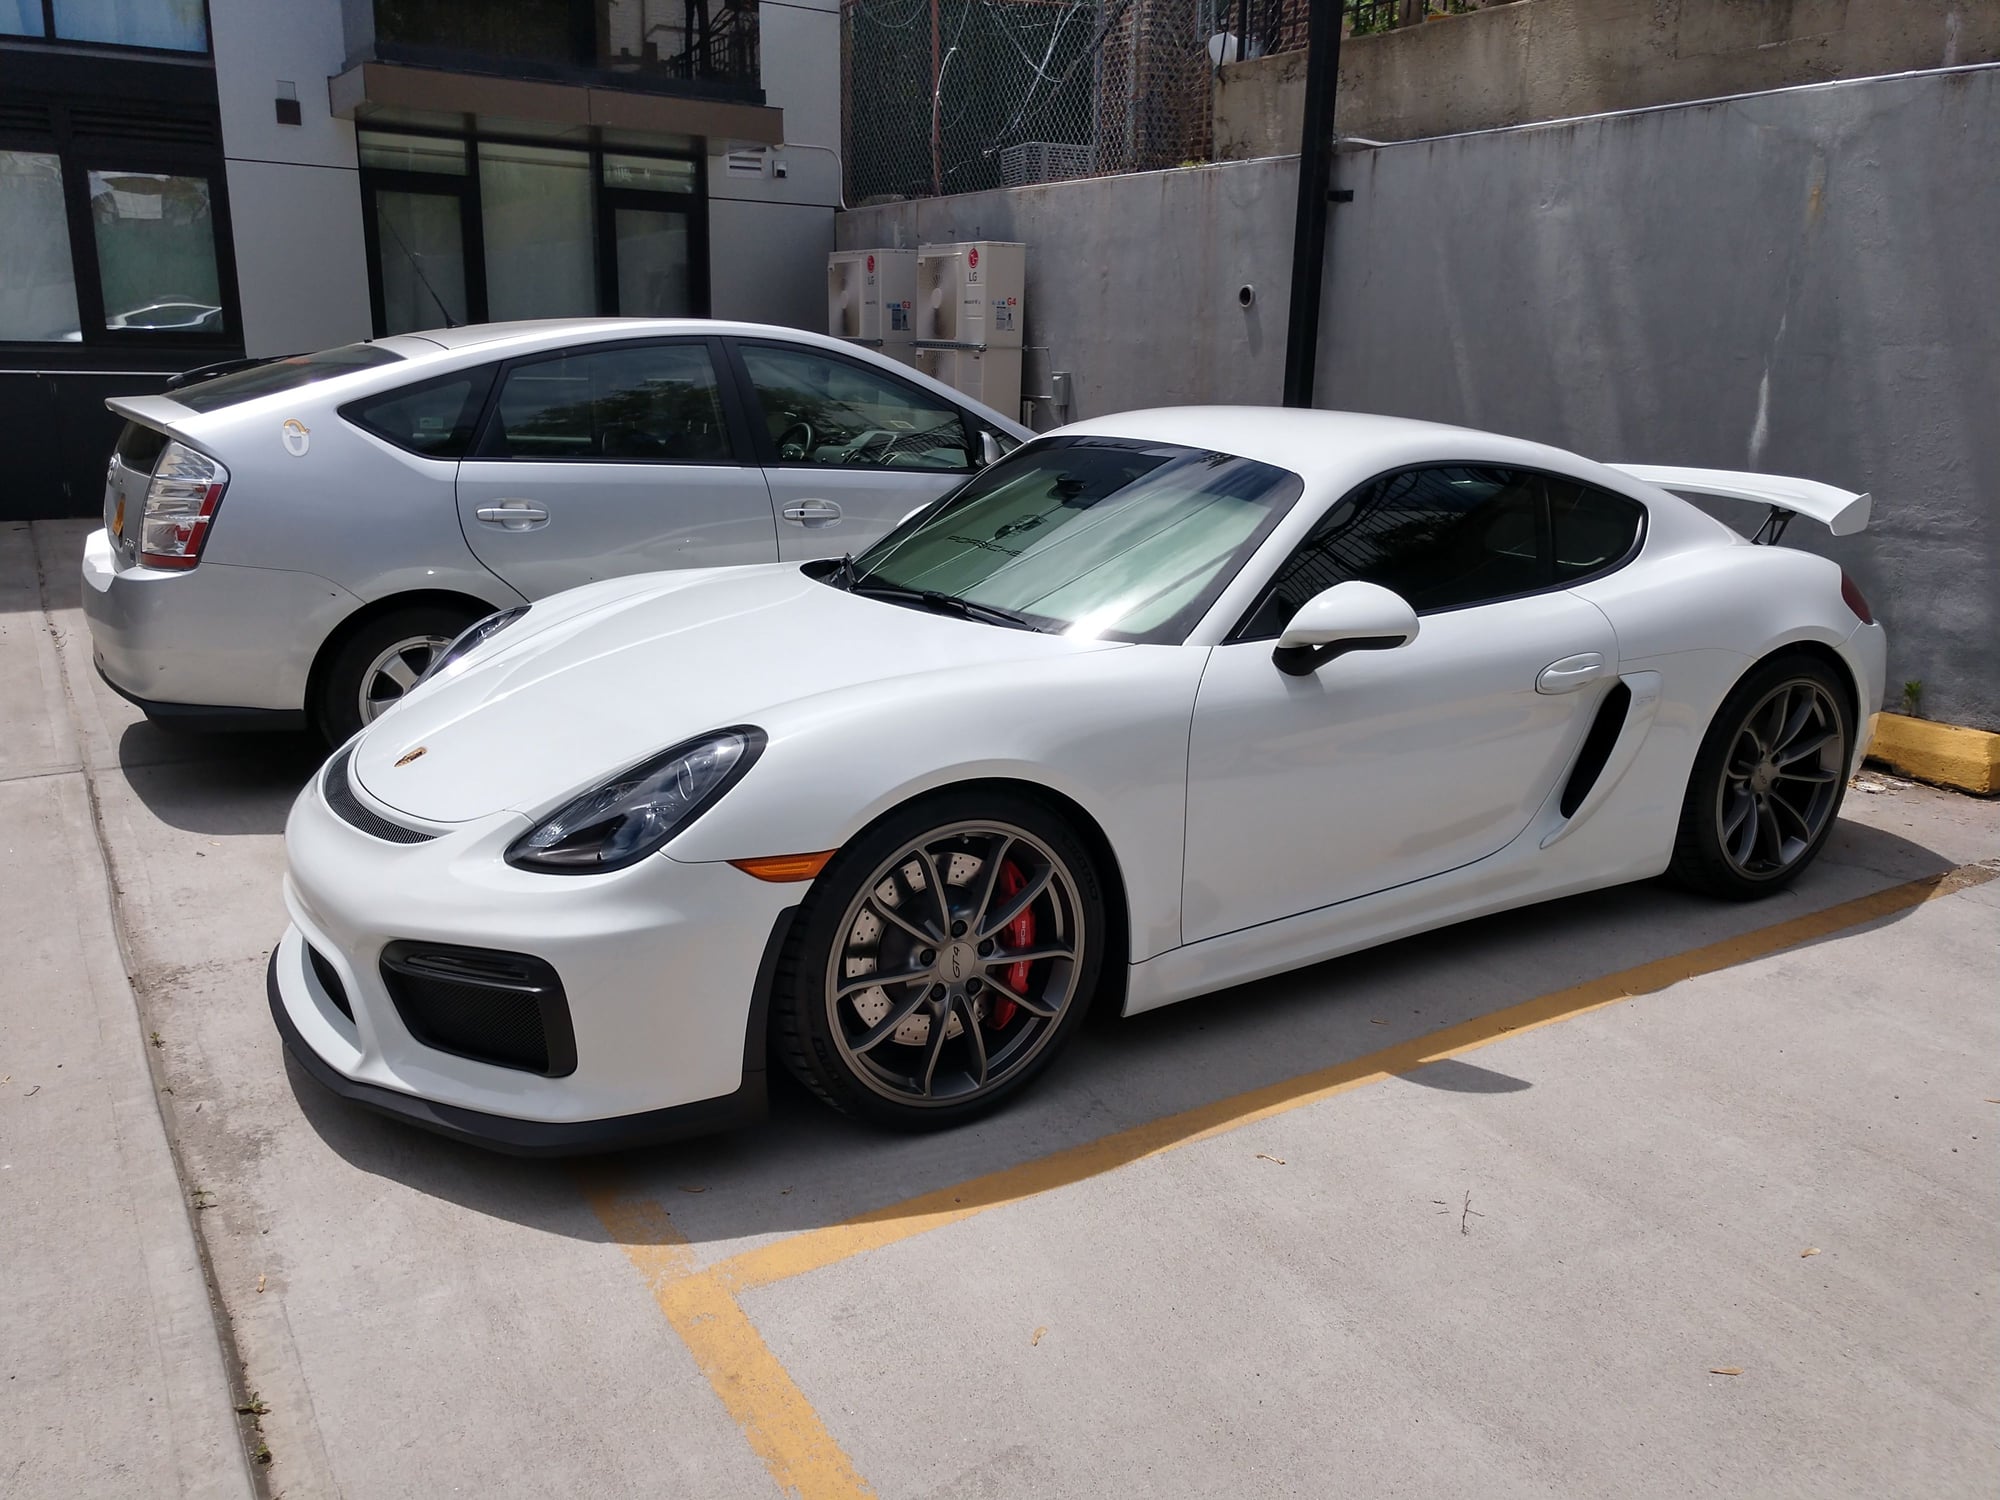 2016 Porsche Cayman GT4 - FS: White Cayman GT4 with 21k miles. PPF, ceramic coating, and more! - Used - VIN WP0AC2A87GK197596 - 21,251 Miles - 6 cyl - 2WD - Manual - Coupe - White - Brooklyn, NY 11252, United States